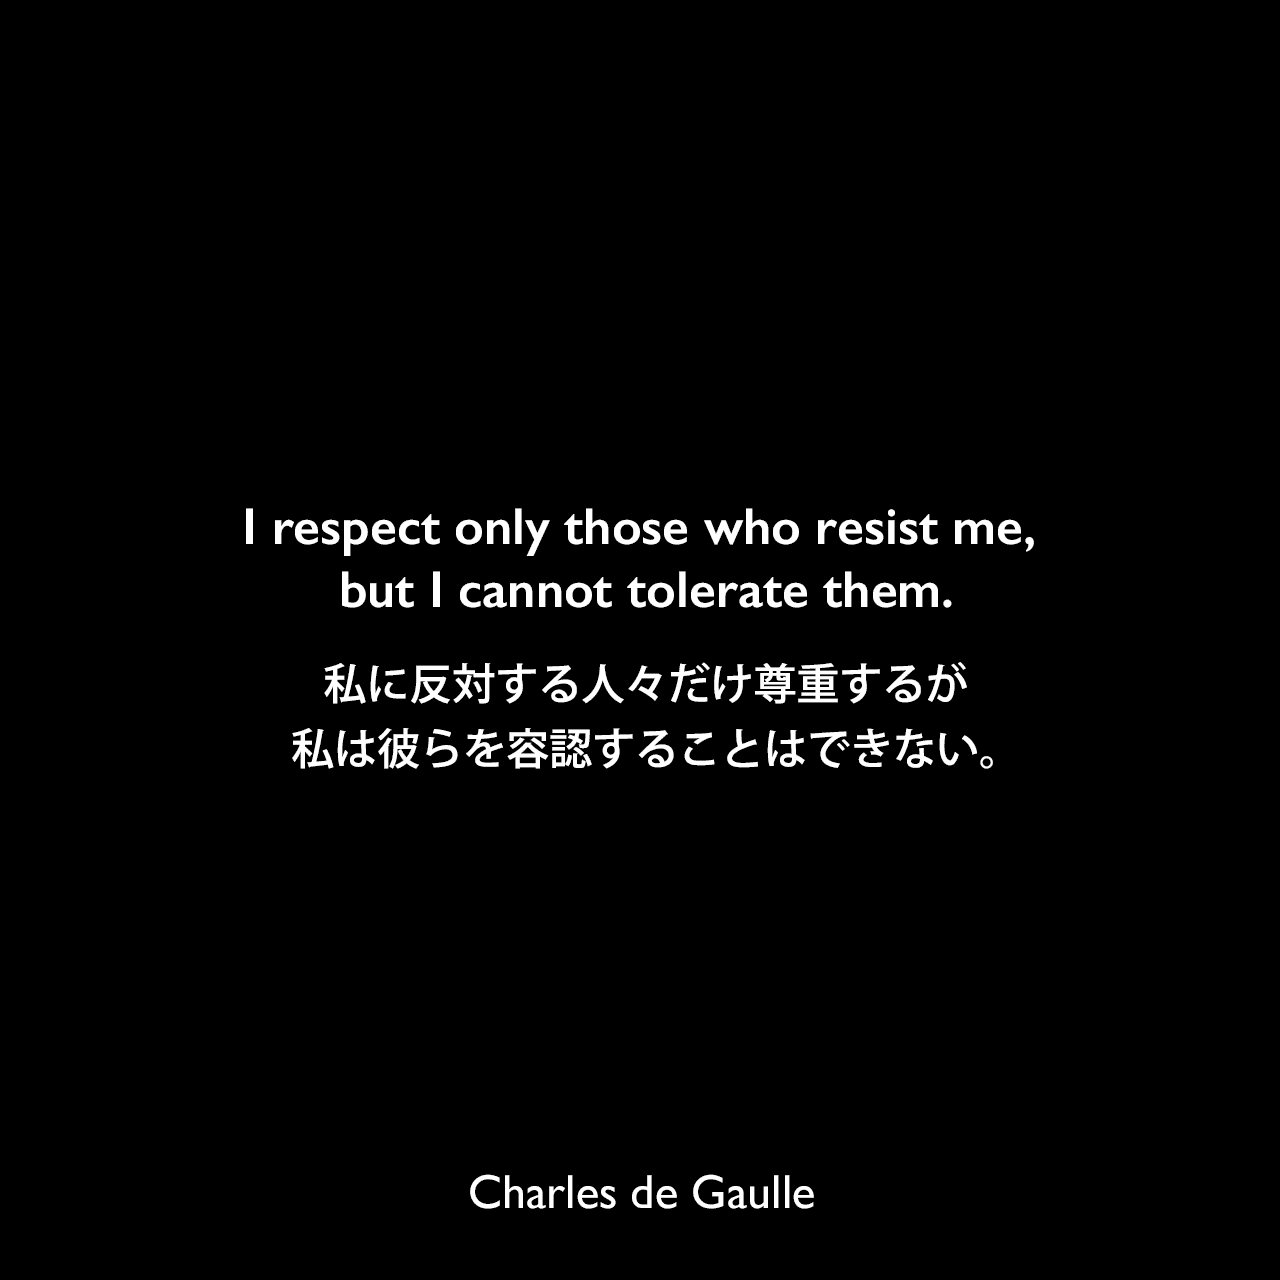 I respect only those who resist me, but I cannot tolerate them.私に反対する人々だけ尊重するが、私は彼らを容認することはできない。Charles de Gaulle